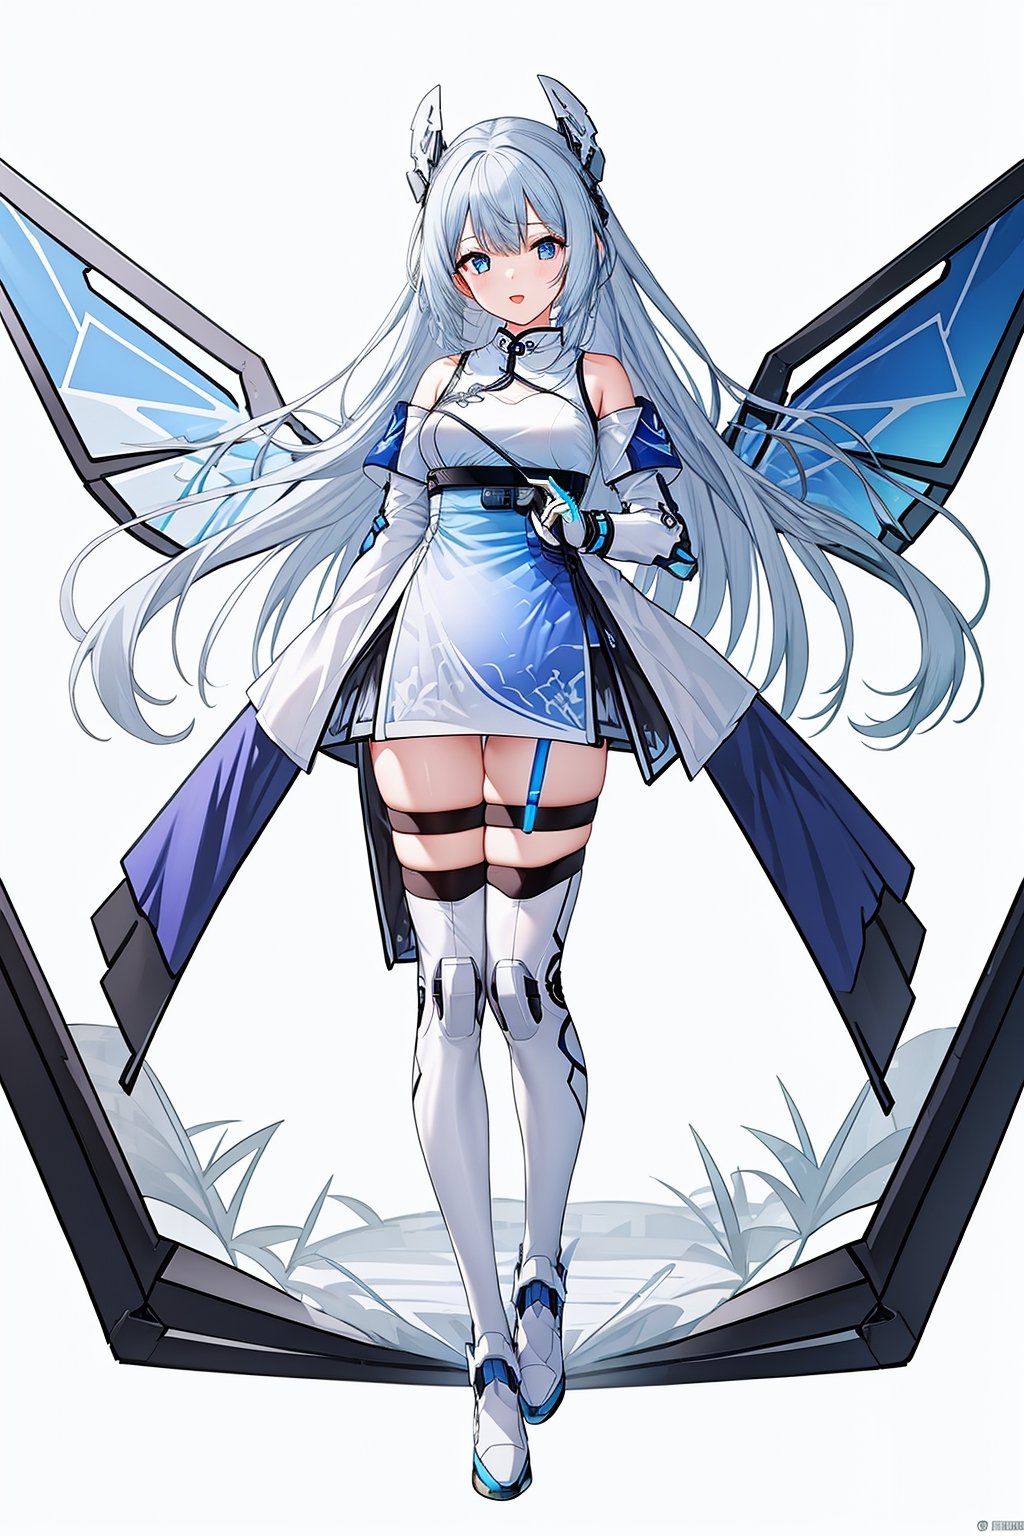 1 girl, solo, blue and white gradual color Mecha pants, wings, blue eyes, long hair, purple shoes, hair accessories, looking at the audience, white hair, hair accessories, bangs, blue eyes, staff, clean background, mechanical wings, (graphics card fan: 1.5), gloves, simple background, cute, graphics card propaganda figures, console, keyboard, mouse, handle, gradient color cheongsam, festive, (blue and white porcelain theme :1.5), Chinese ancient architecture, cheongsam,<lora:天启姬:0.7>,